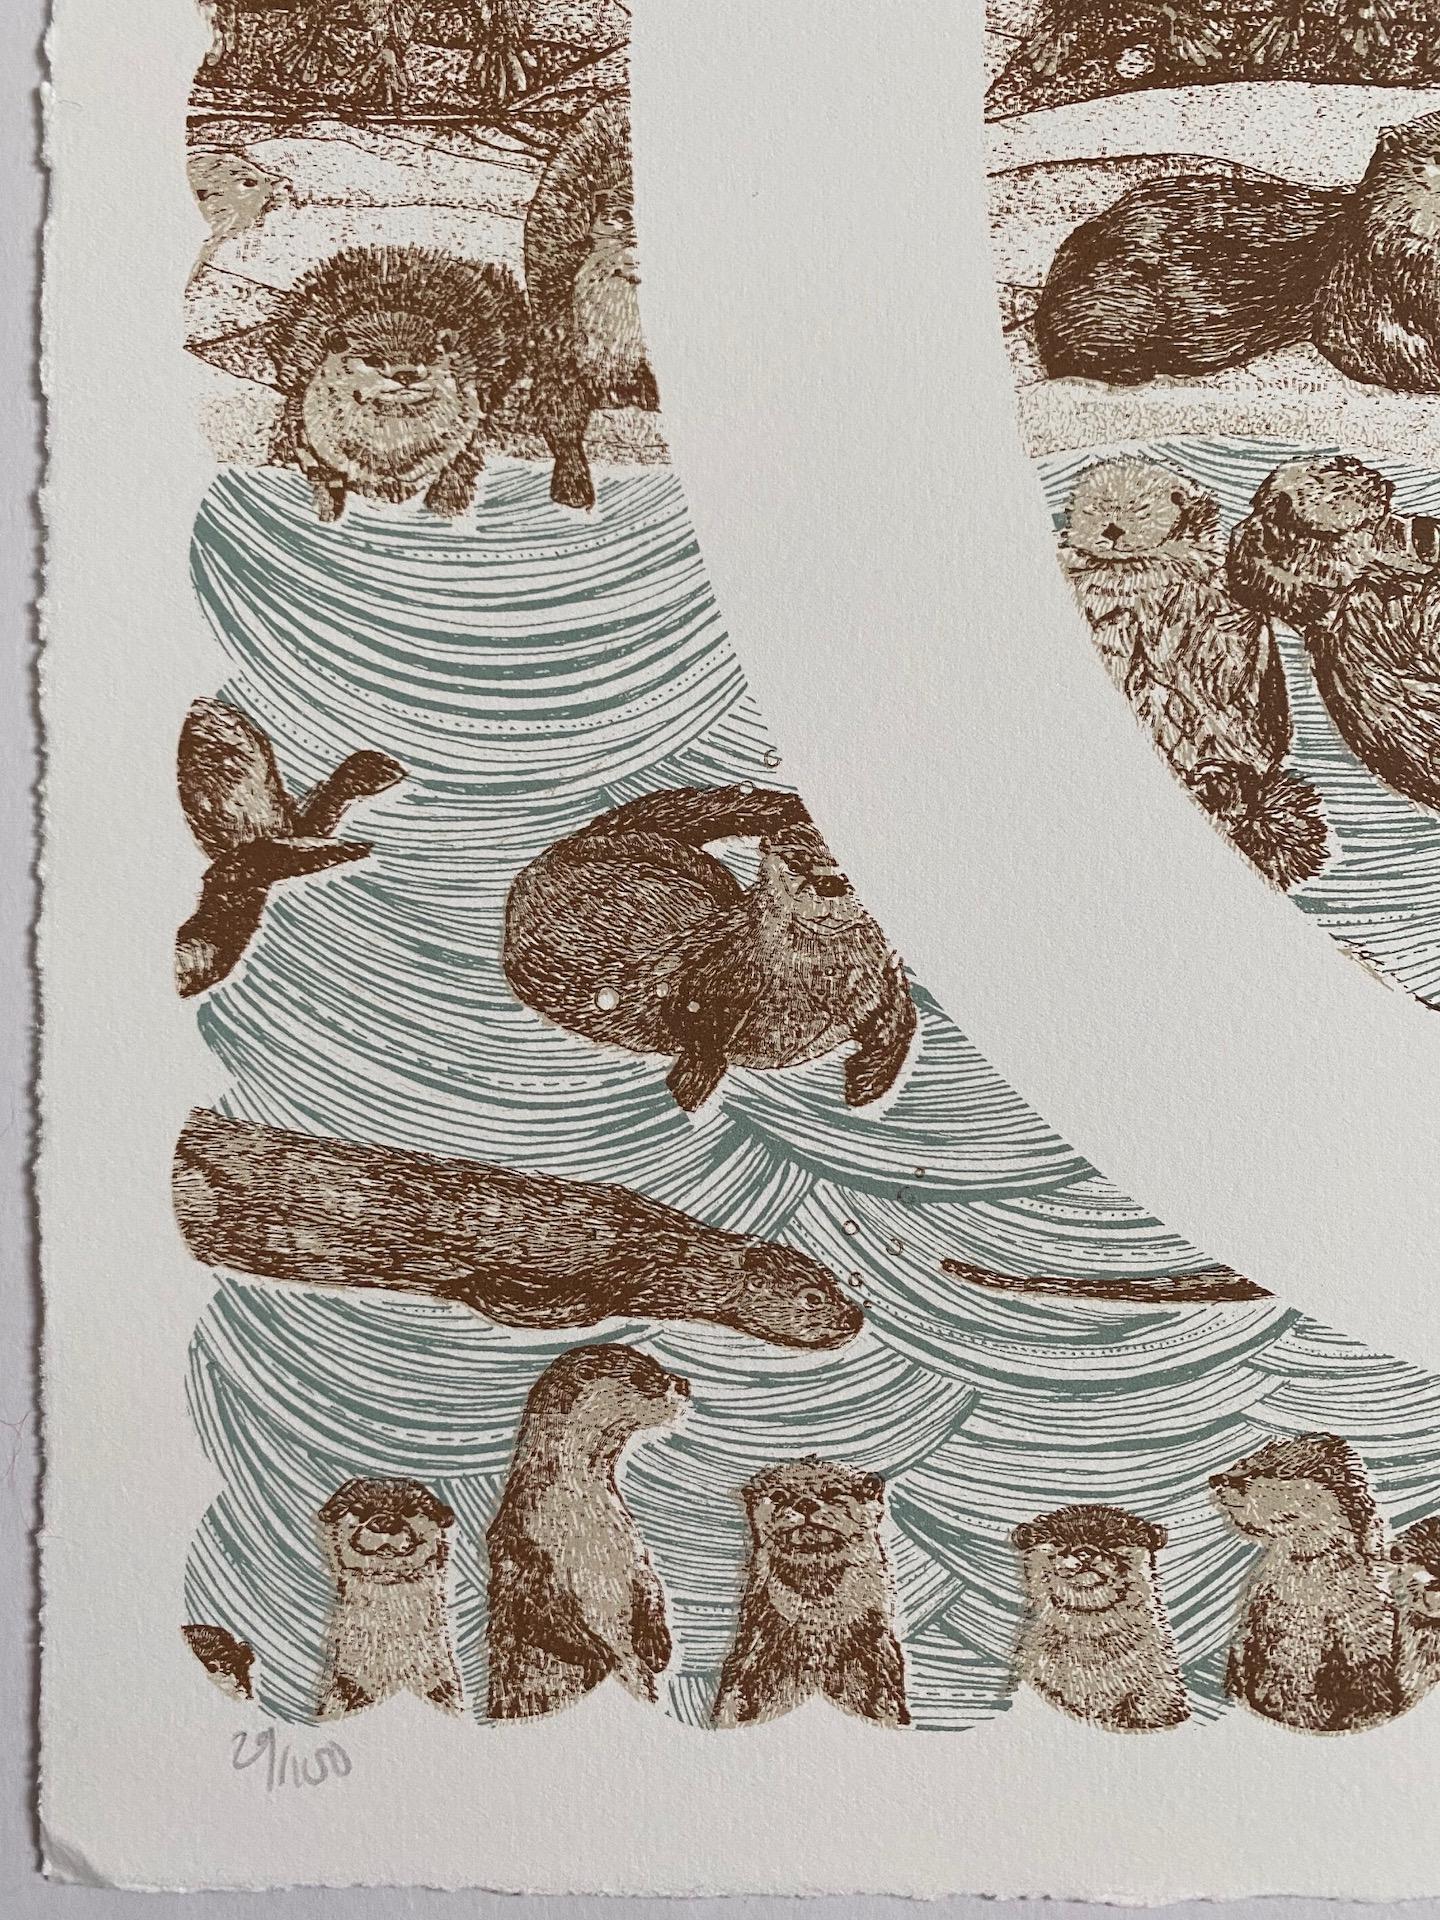 Clare Halifax
O is for Otter
Limited Edition 3 colour screen print
Edition of 100
Sheet Size: H 38cm x W 37cm x 0.1cm
Sold Unframed
Hand printed by the artist onto somerset satin paper 300gms with deckle edge.
Please Note that in situ images are